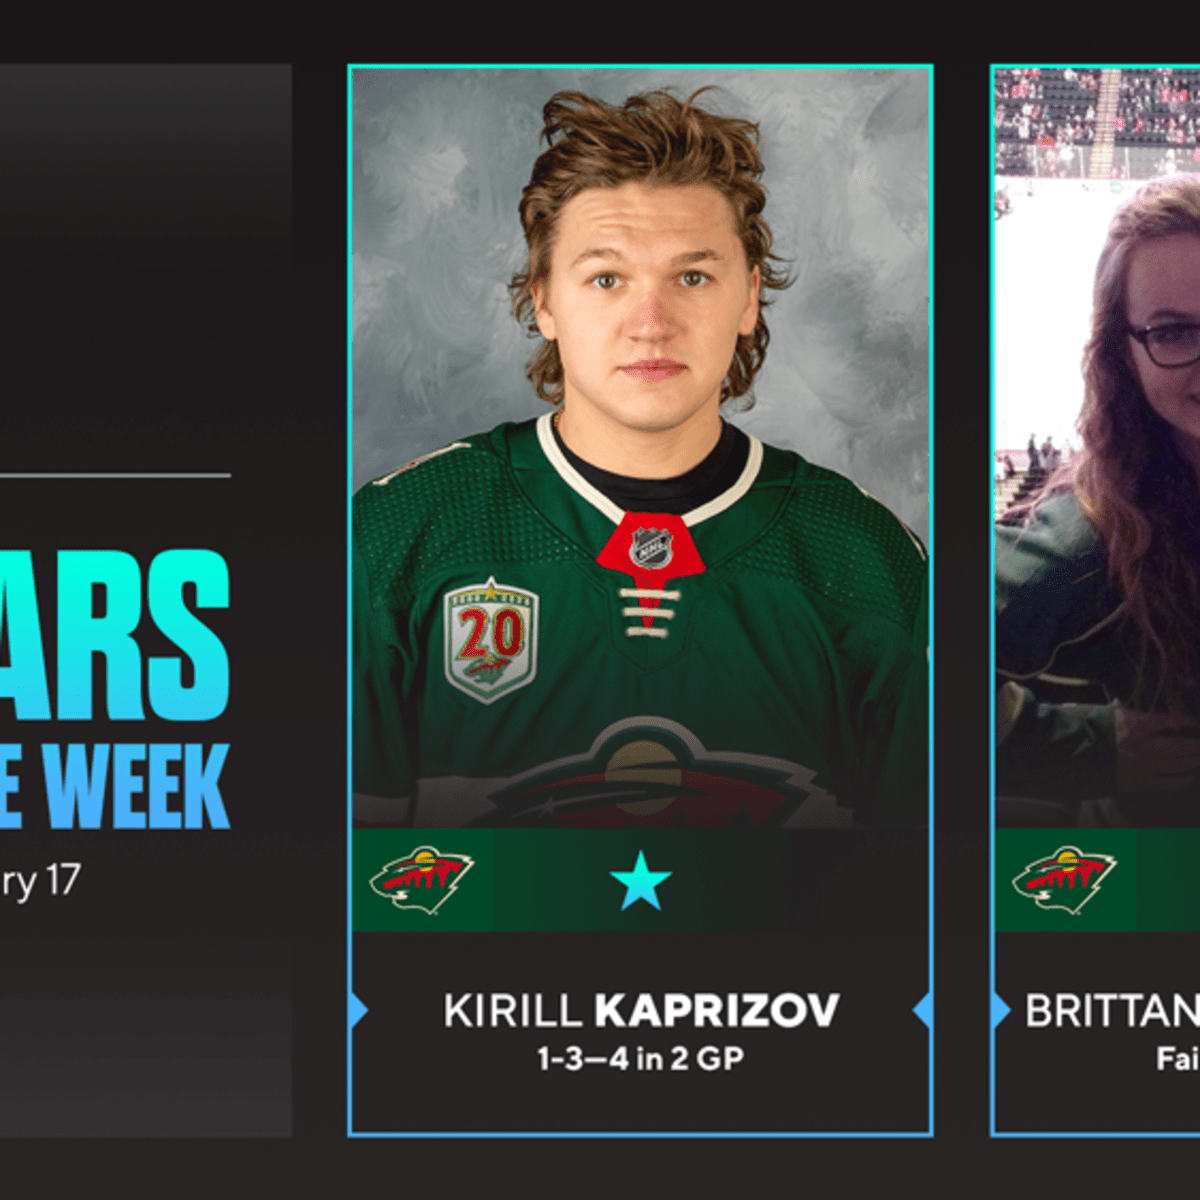 Wild superstar Kirill Kaprizov is a perfect face of the franchise